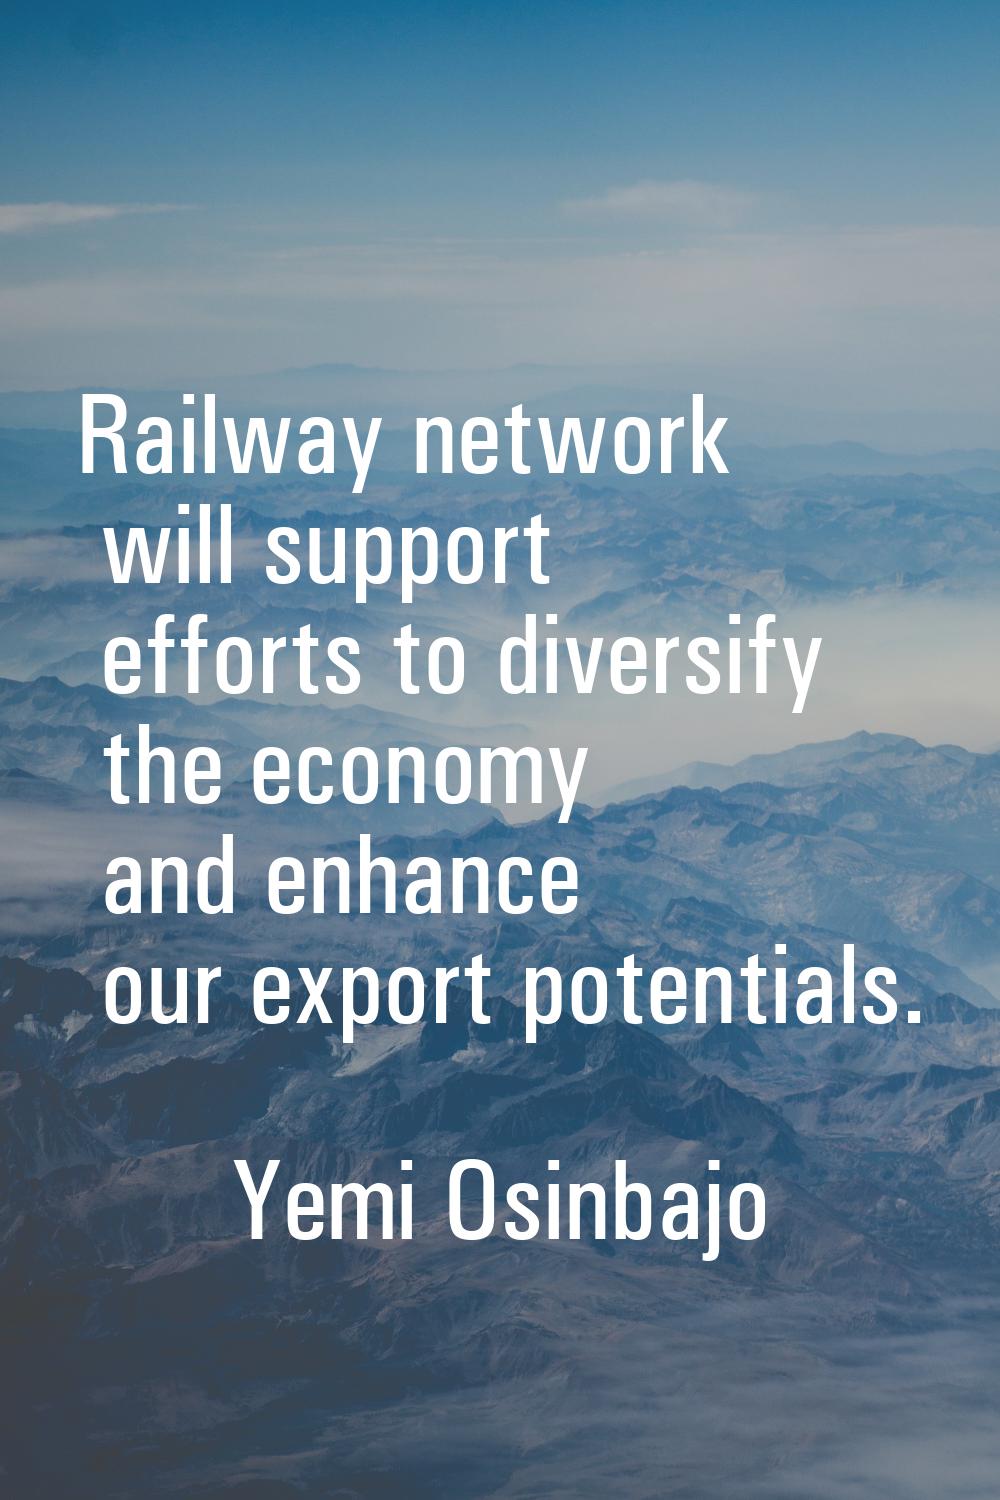 Railway network will support efforts to diversify the economy and enhance our export potentials.